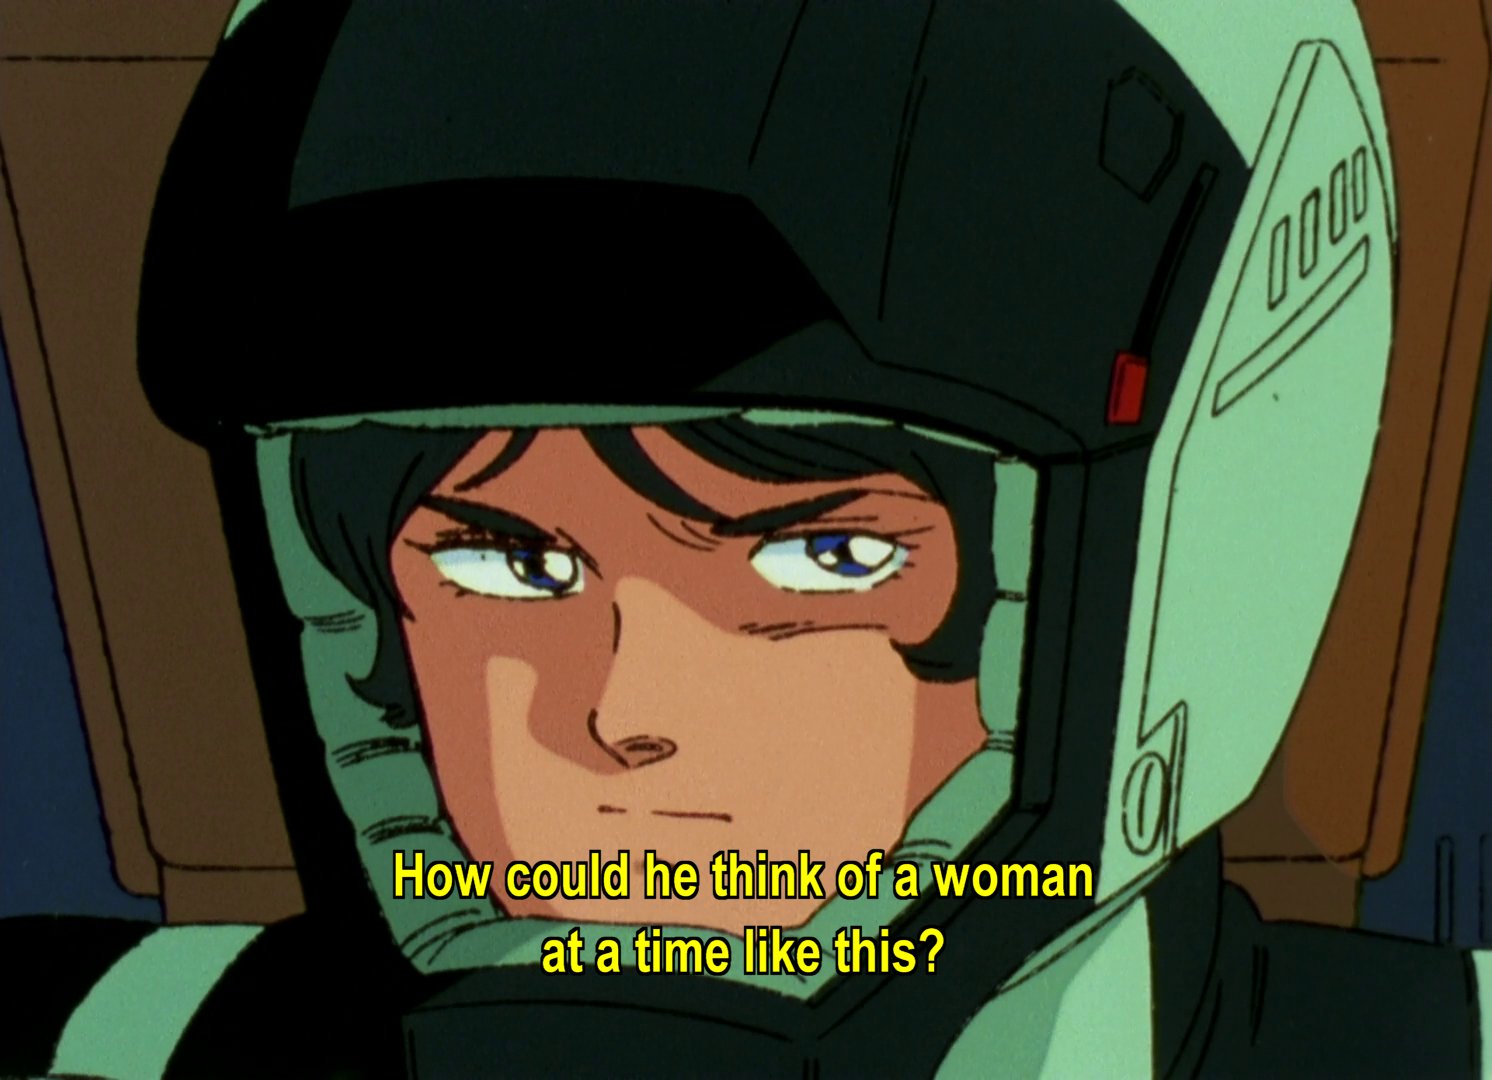 Kamille, annoyed: How could he think of a woman at a time like this?